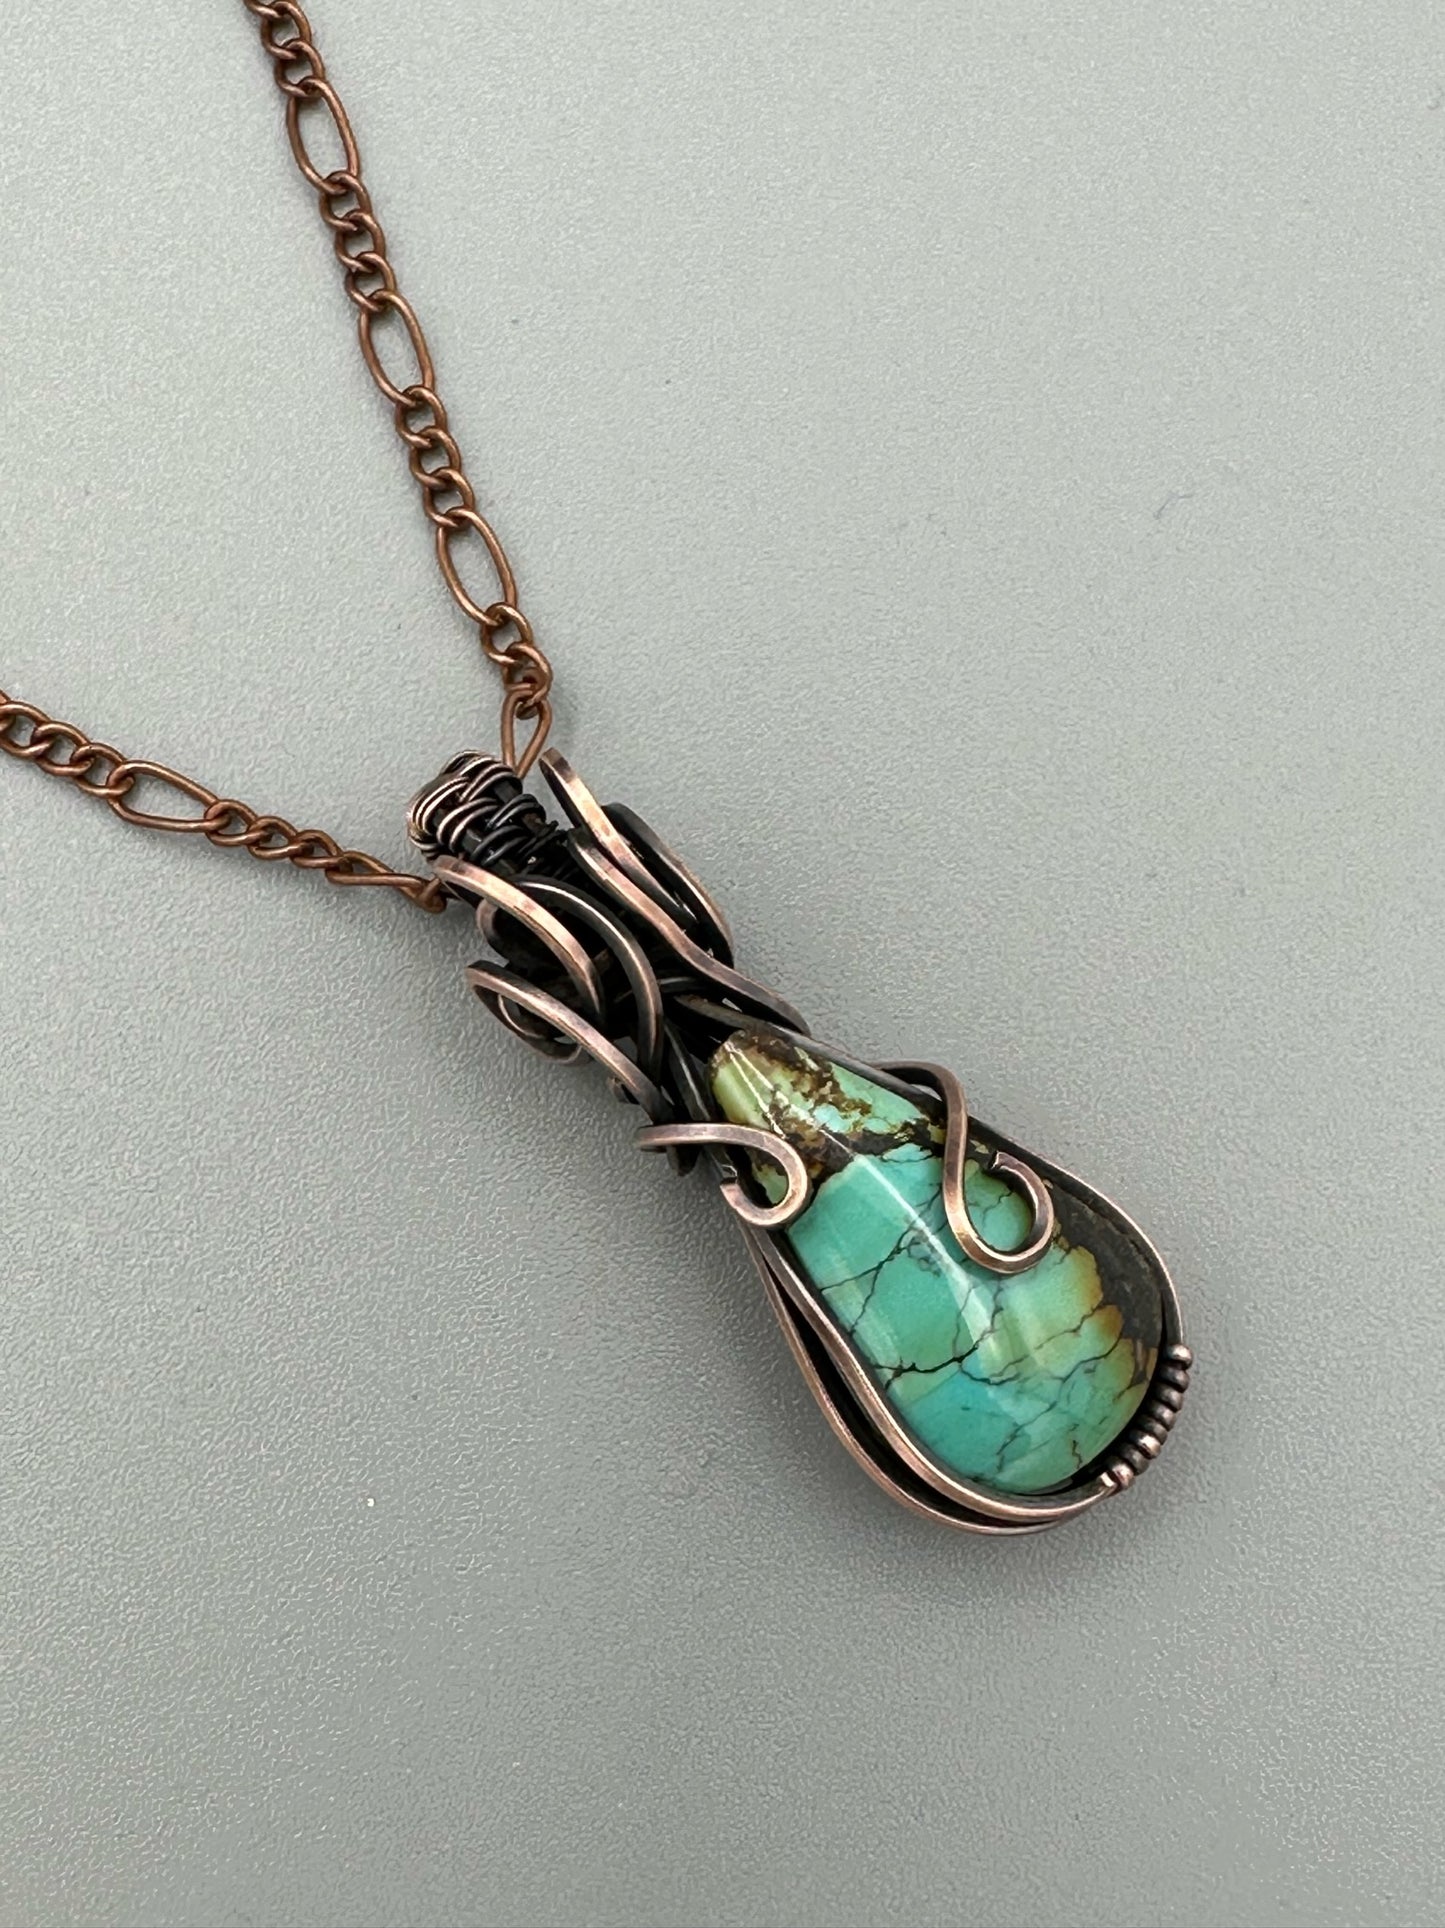 Turquoise Teardrop Wrapped in Oxidized Copper Wire